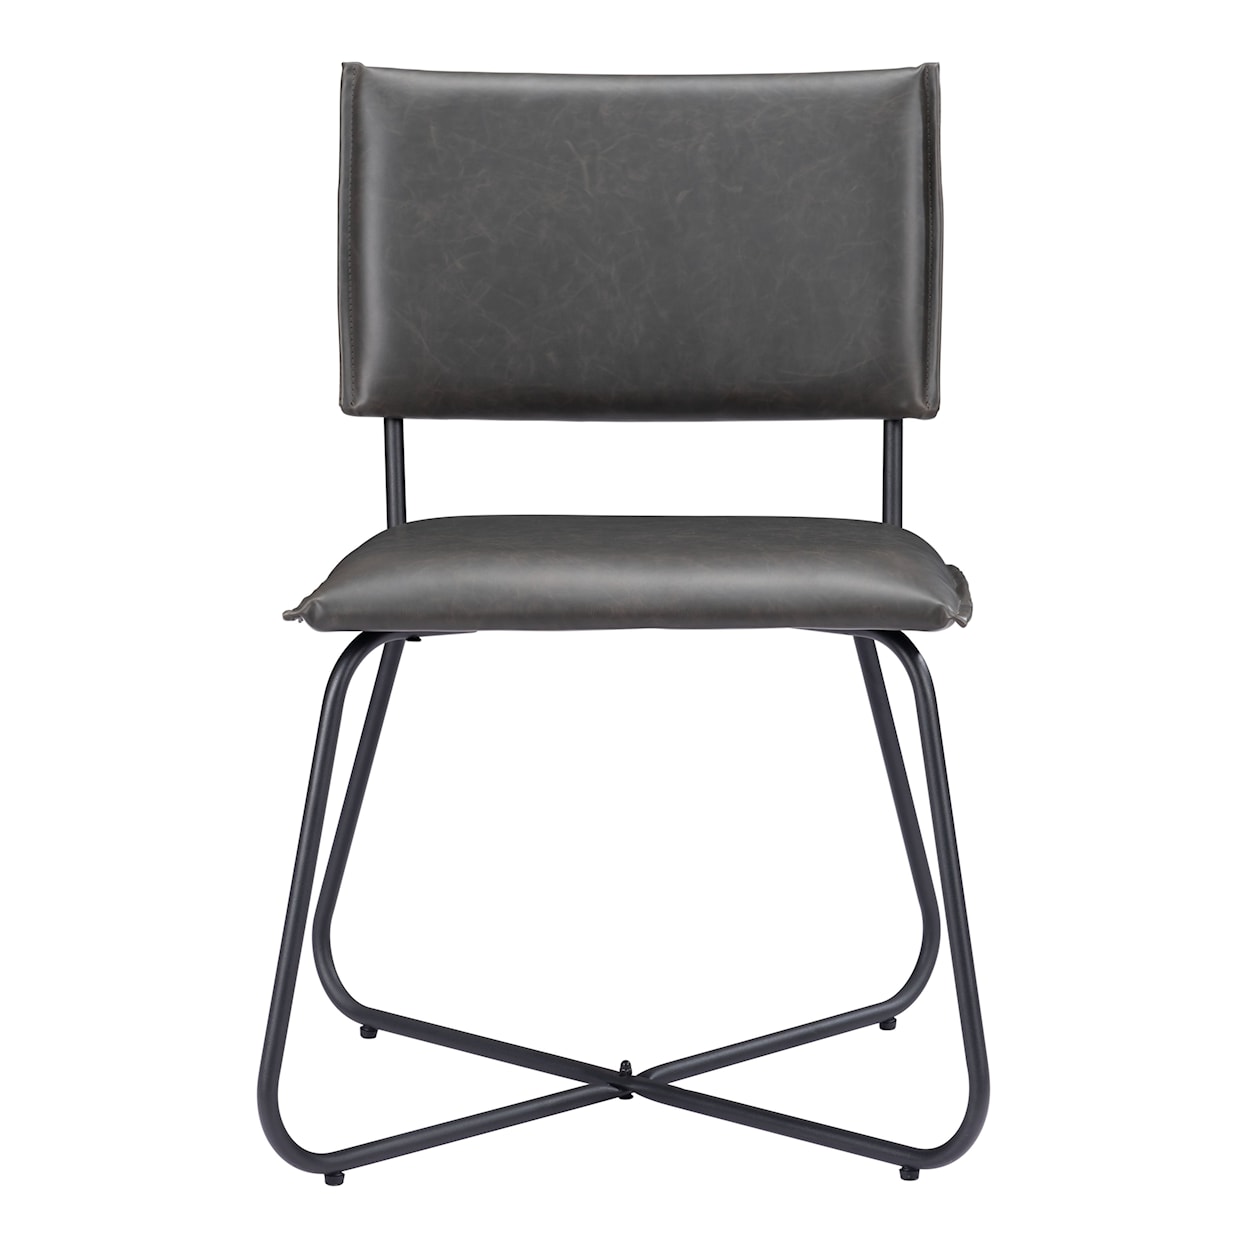 Zuo Grantham Dining Chair Set